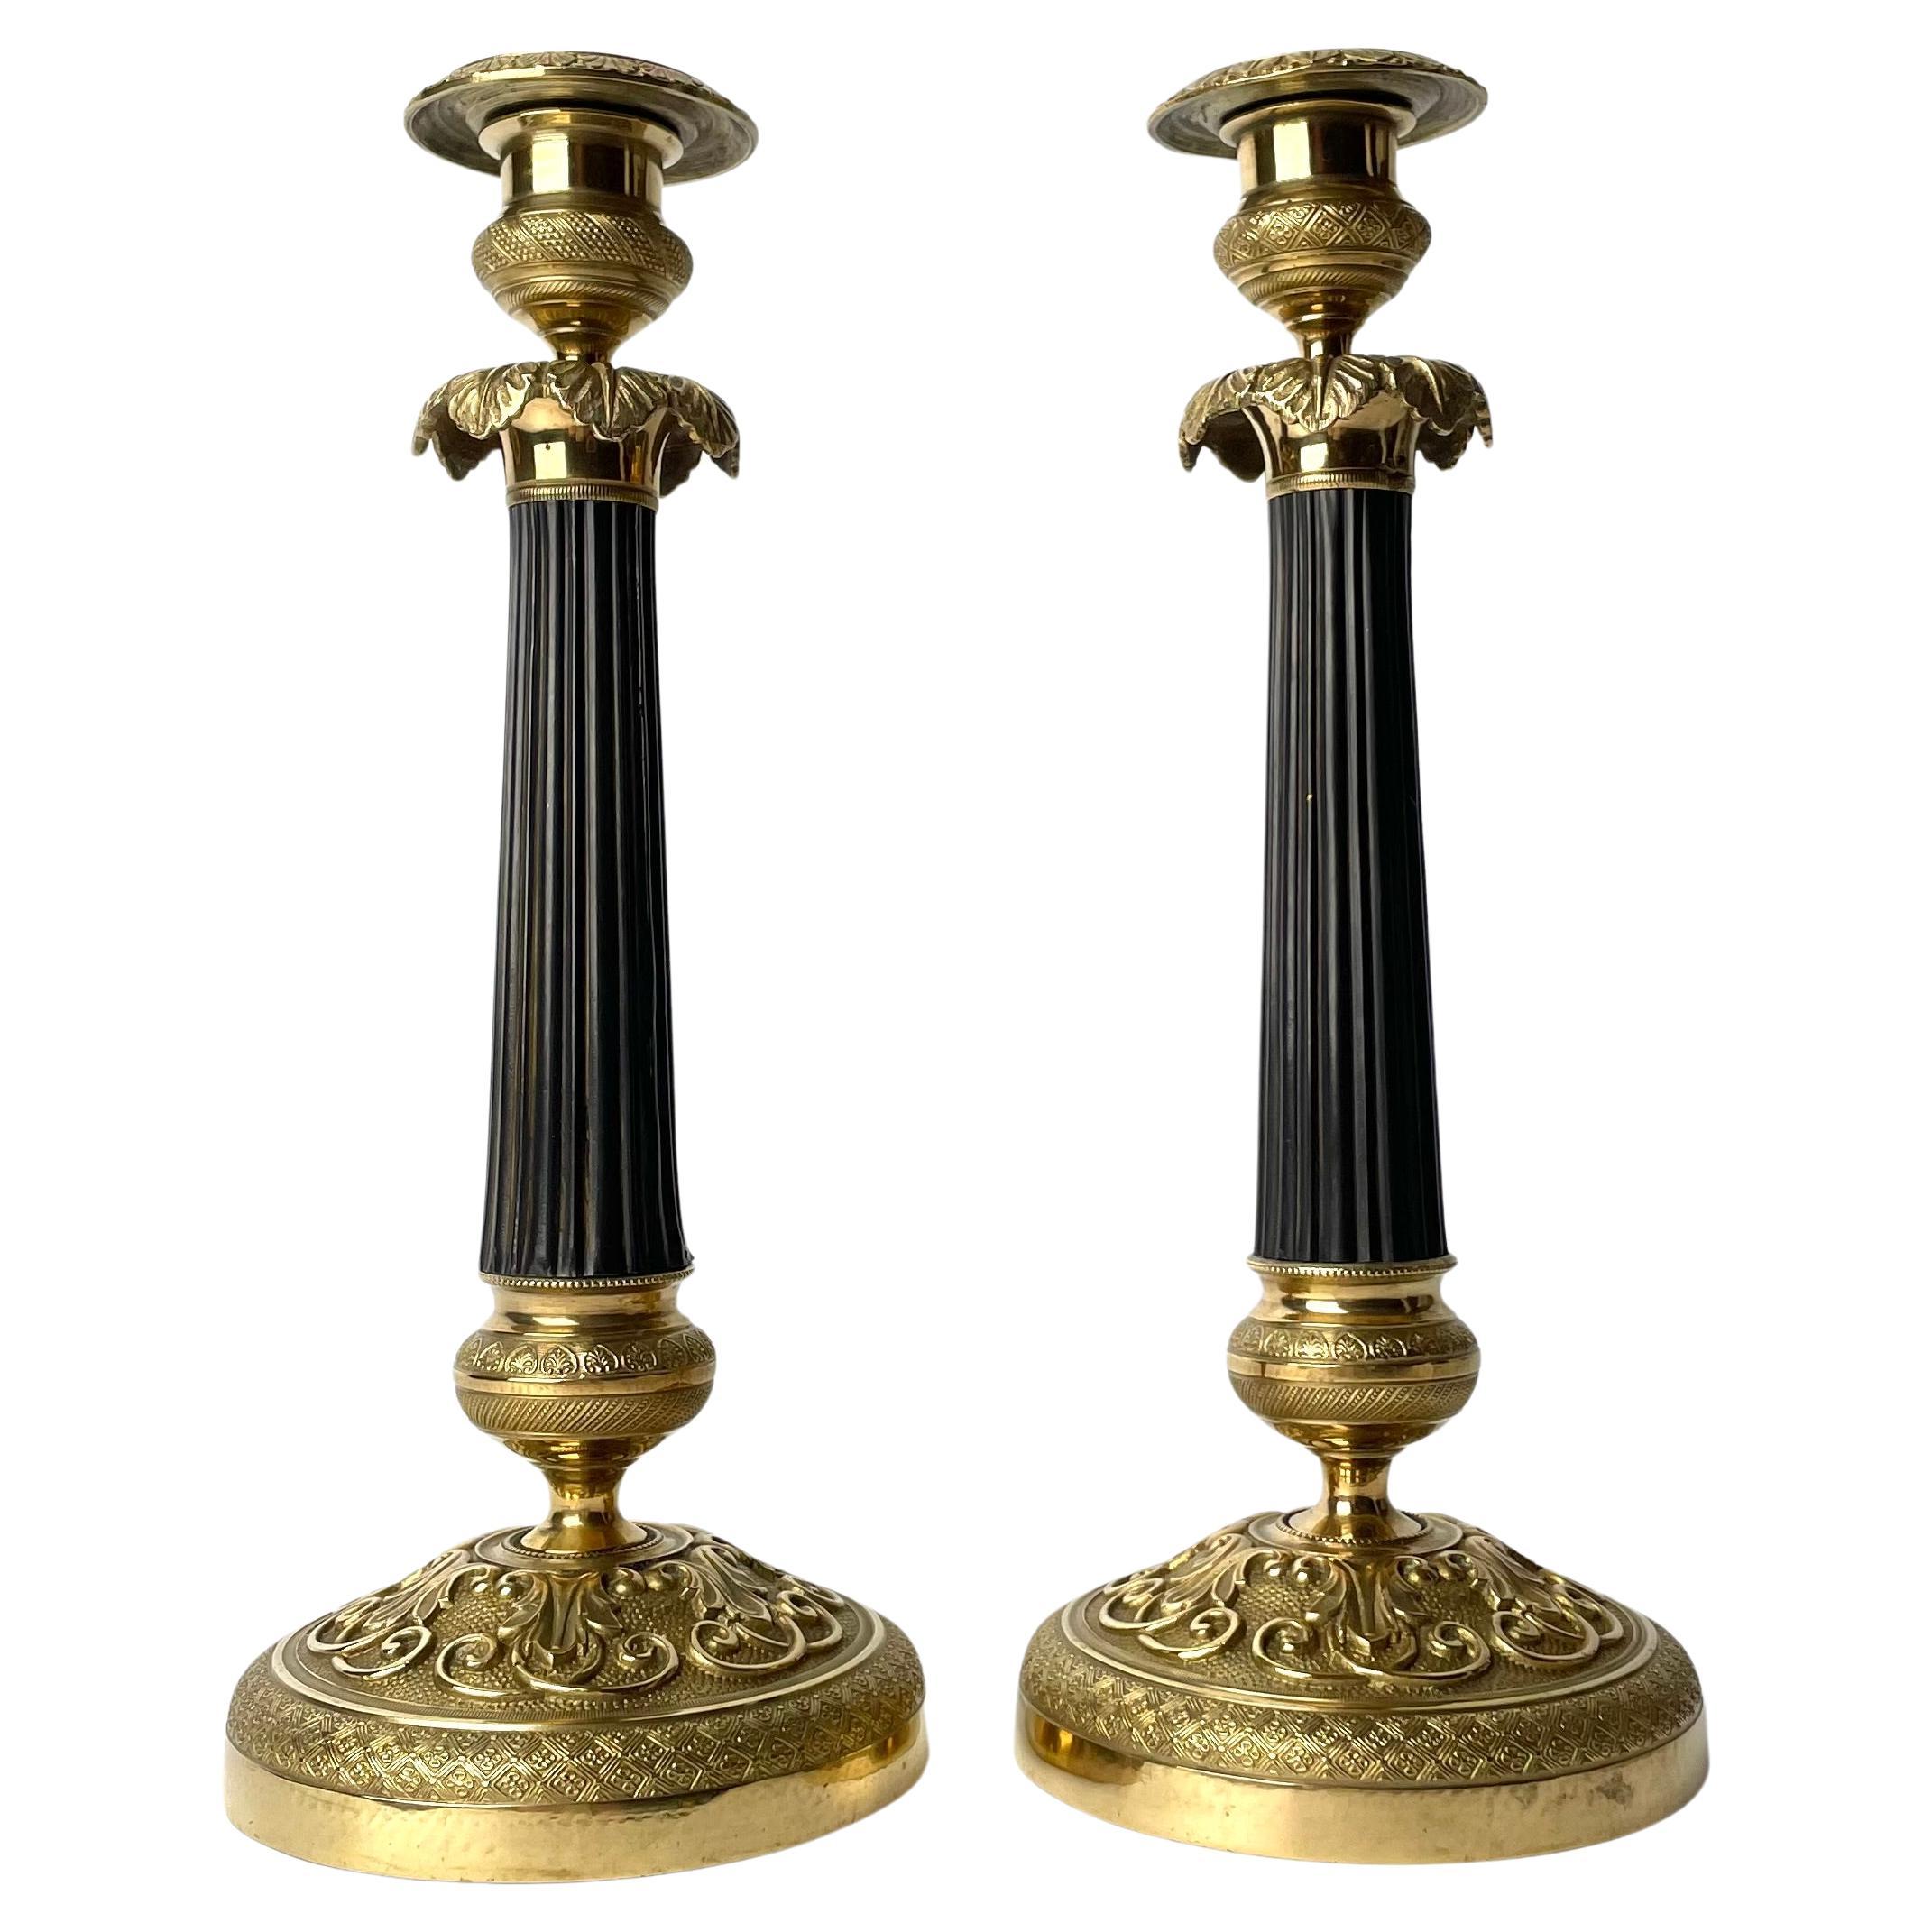 Pair of Empire Candlesticks in gilded and darkpatinated bronze from the 1820s